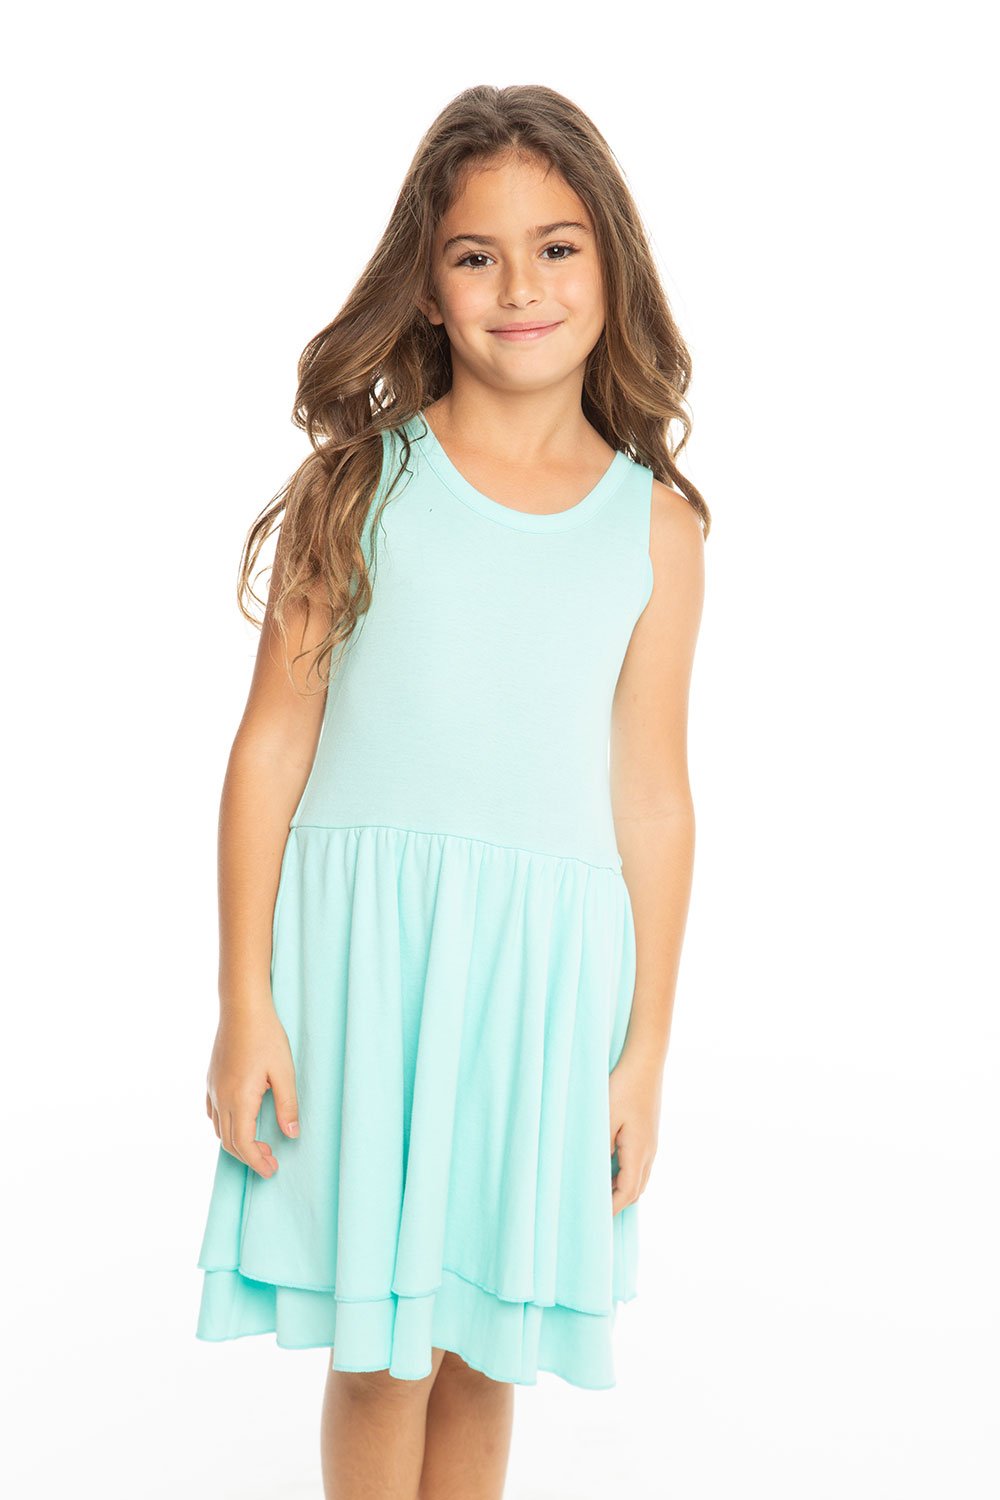 Chaser Kids - Girls Baby Rib Tiered Tank Dress in Paradise